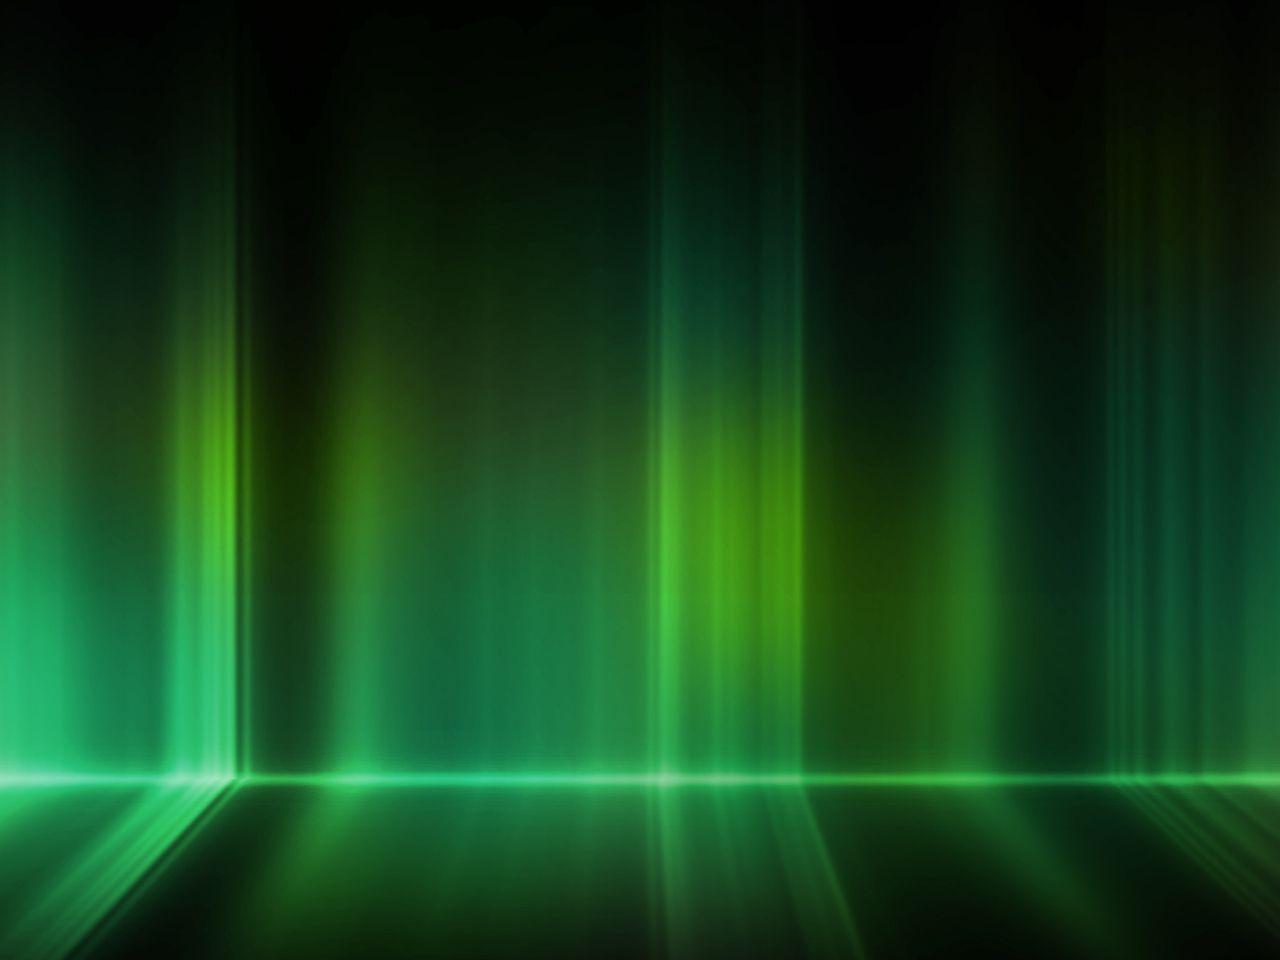 Download free Cinema Dark Green Abstract Quality